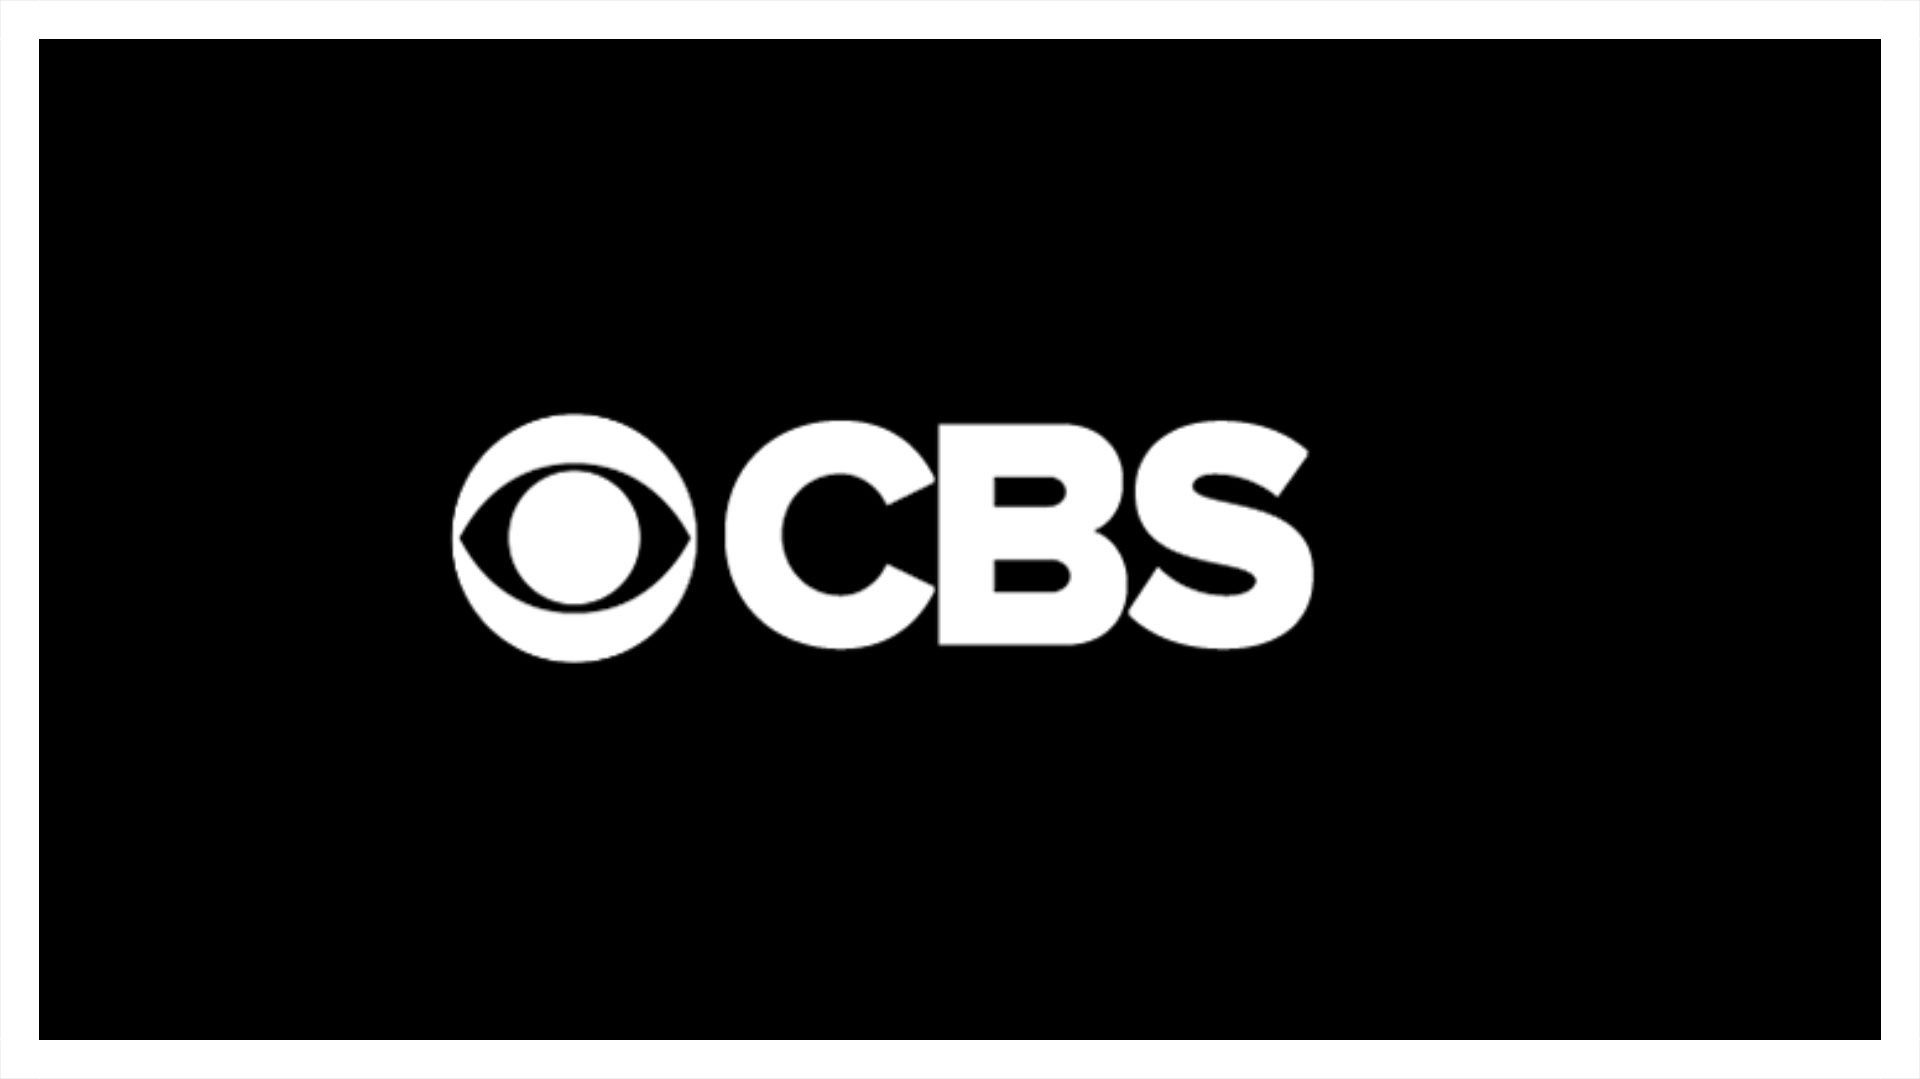 Programming Update For The CBS Primetime Schedule On Tuesday, Jan. 8